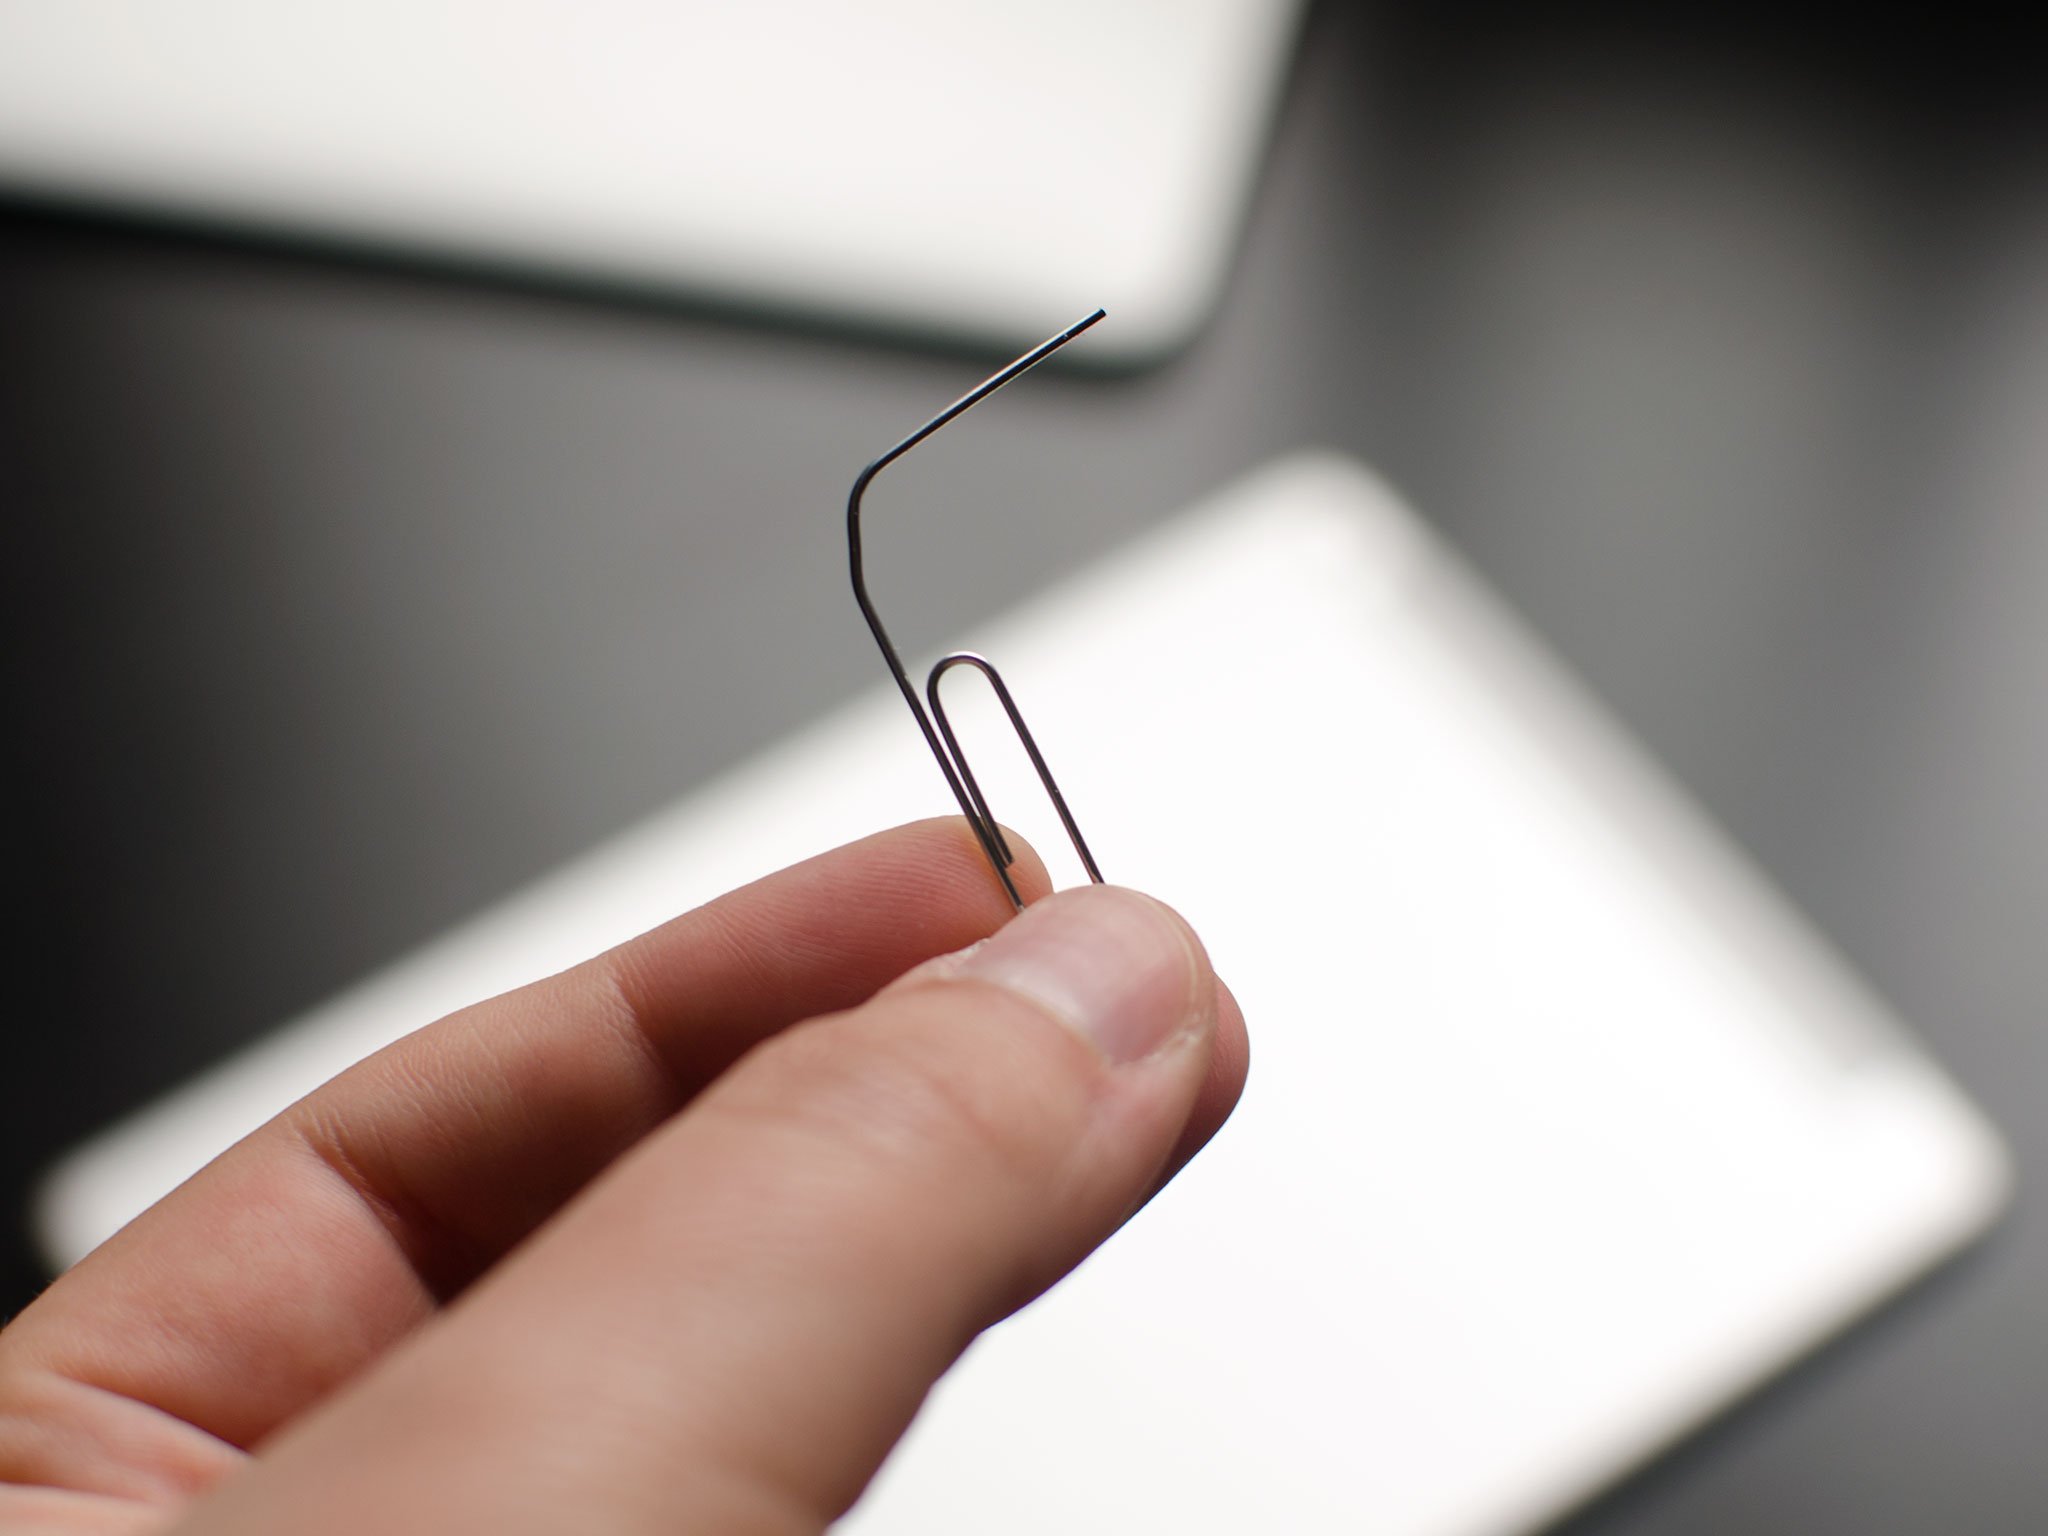 How to remove the SIM card in an iPhone or iPad